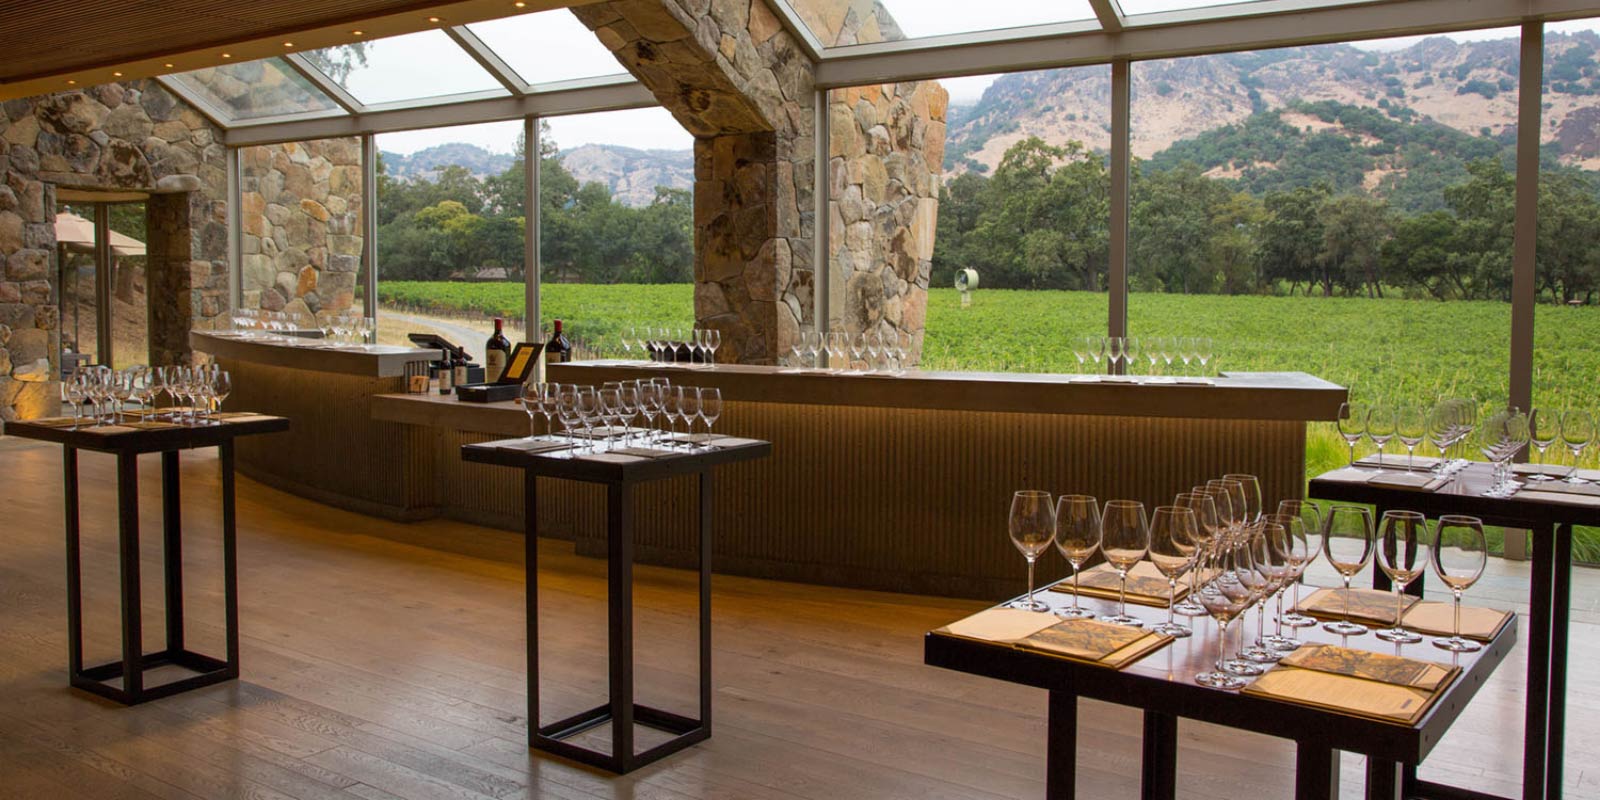 Image of a tasting room with vineyard panoramic view at Stag's Leap Wine Cellars in Napa Valley